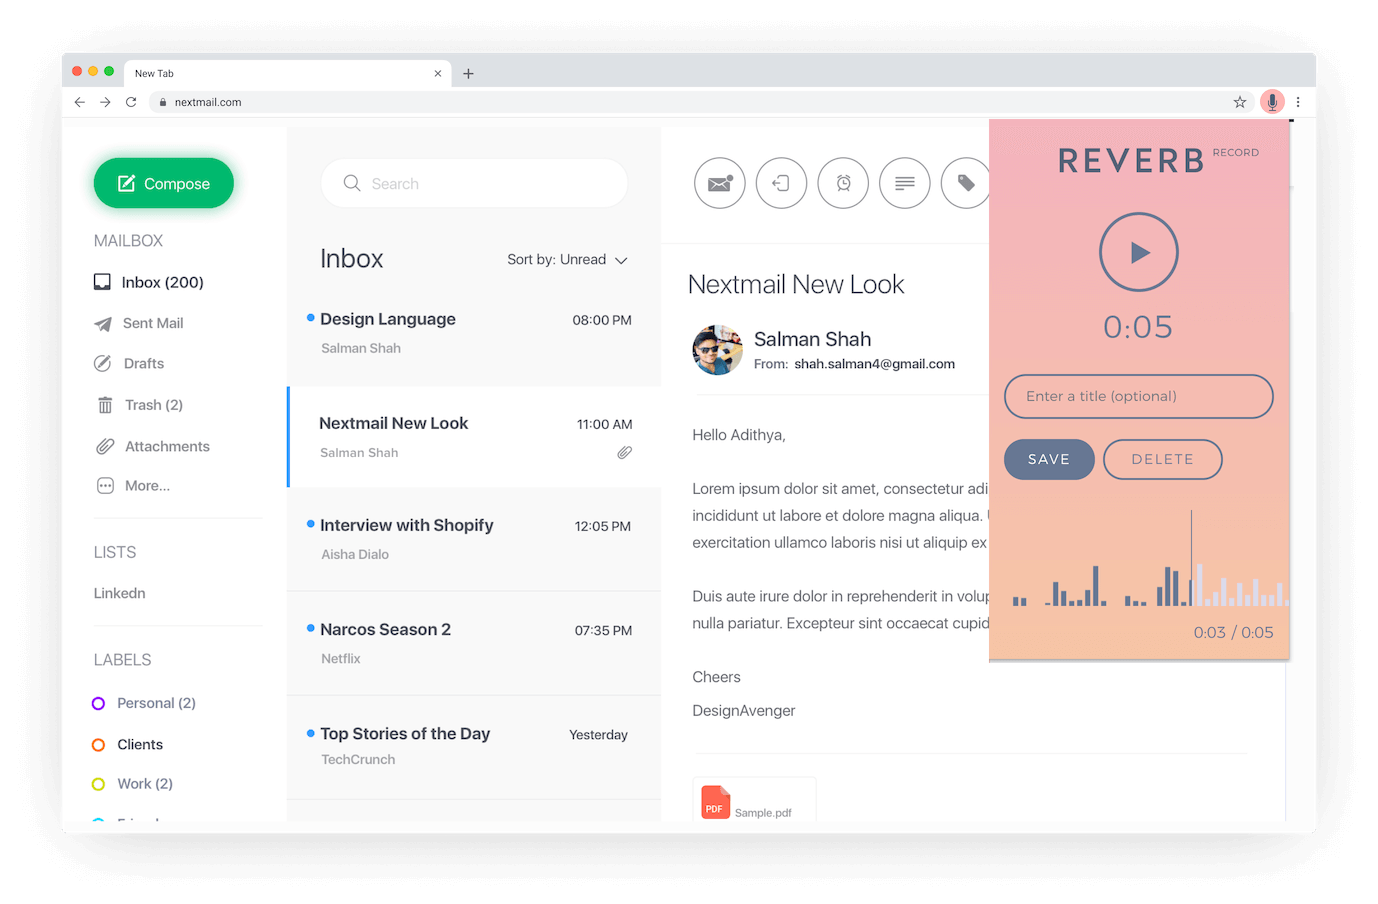 Reverb Record being used to add a voice recording to an email.